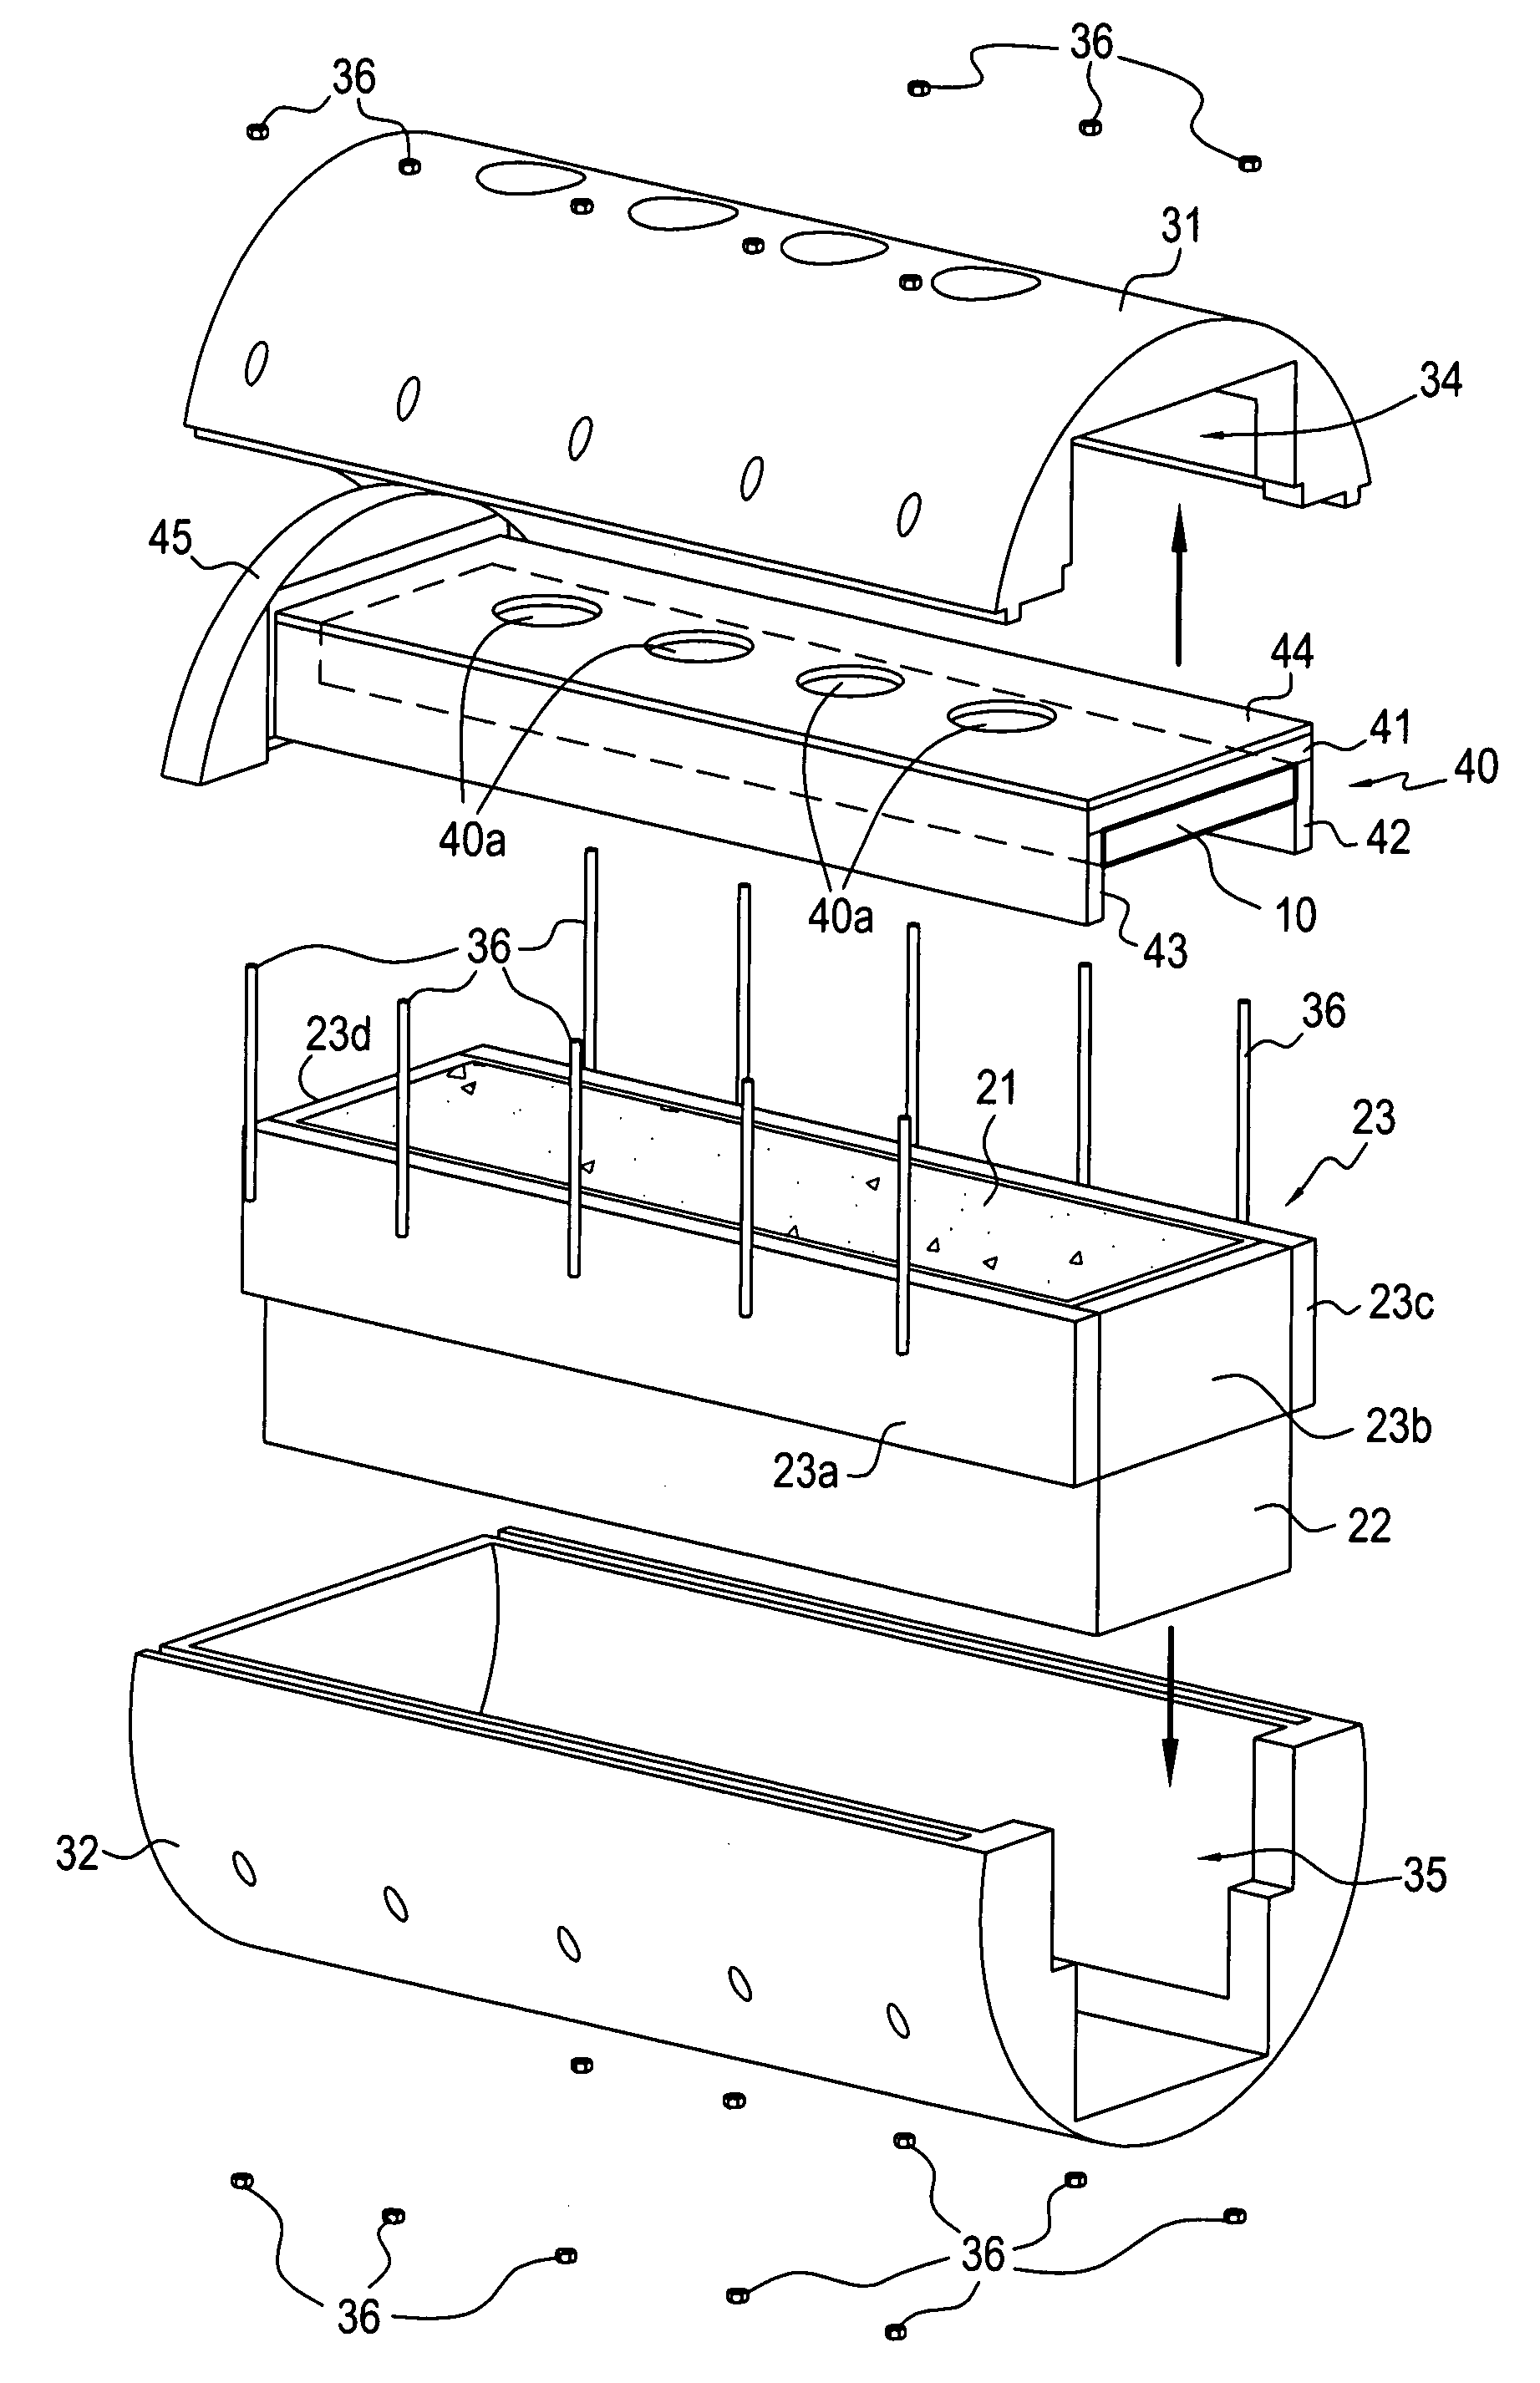 Thermal erosion test device and method for testing thermal protection materials of solid propellant thrusters